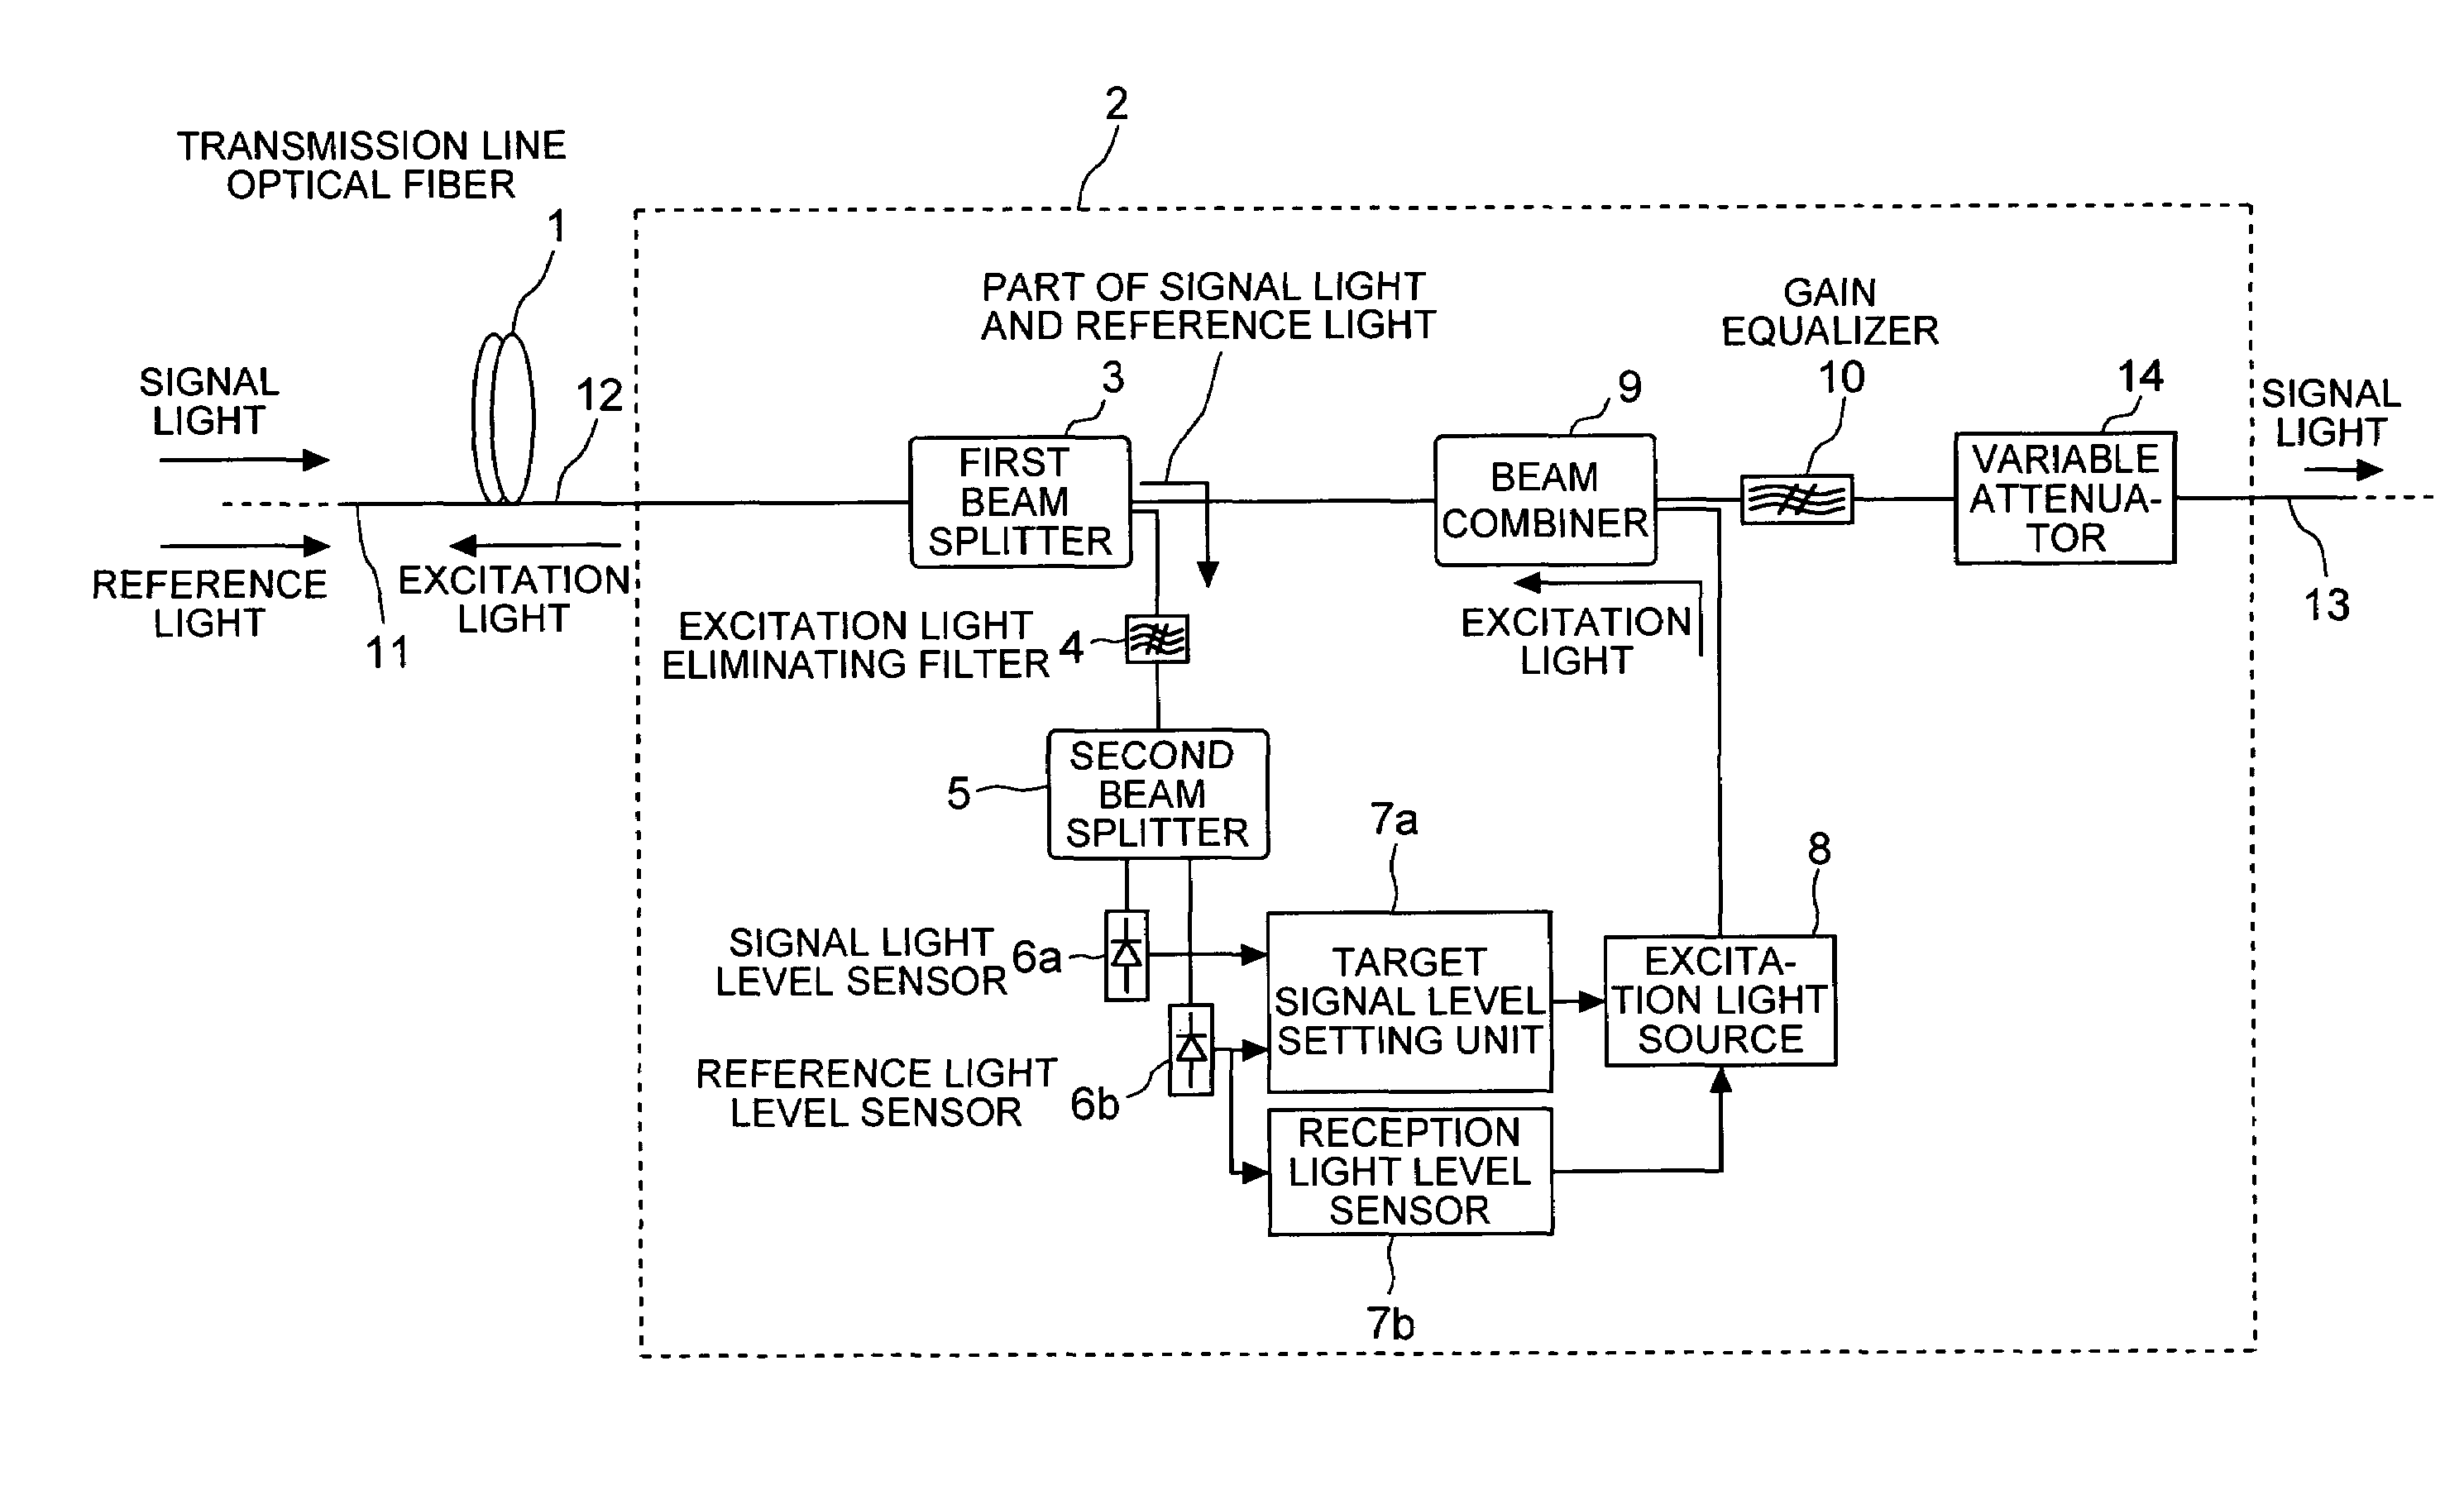 Raman amplifier and optical relay transmission system